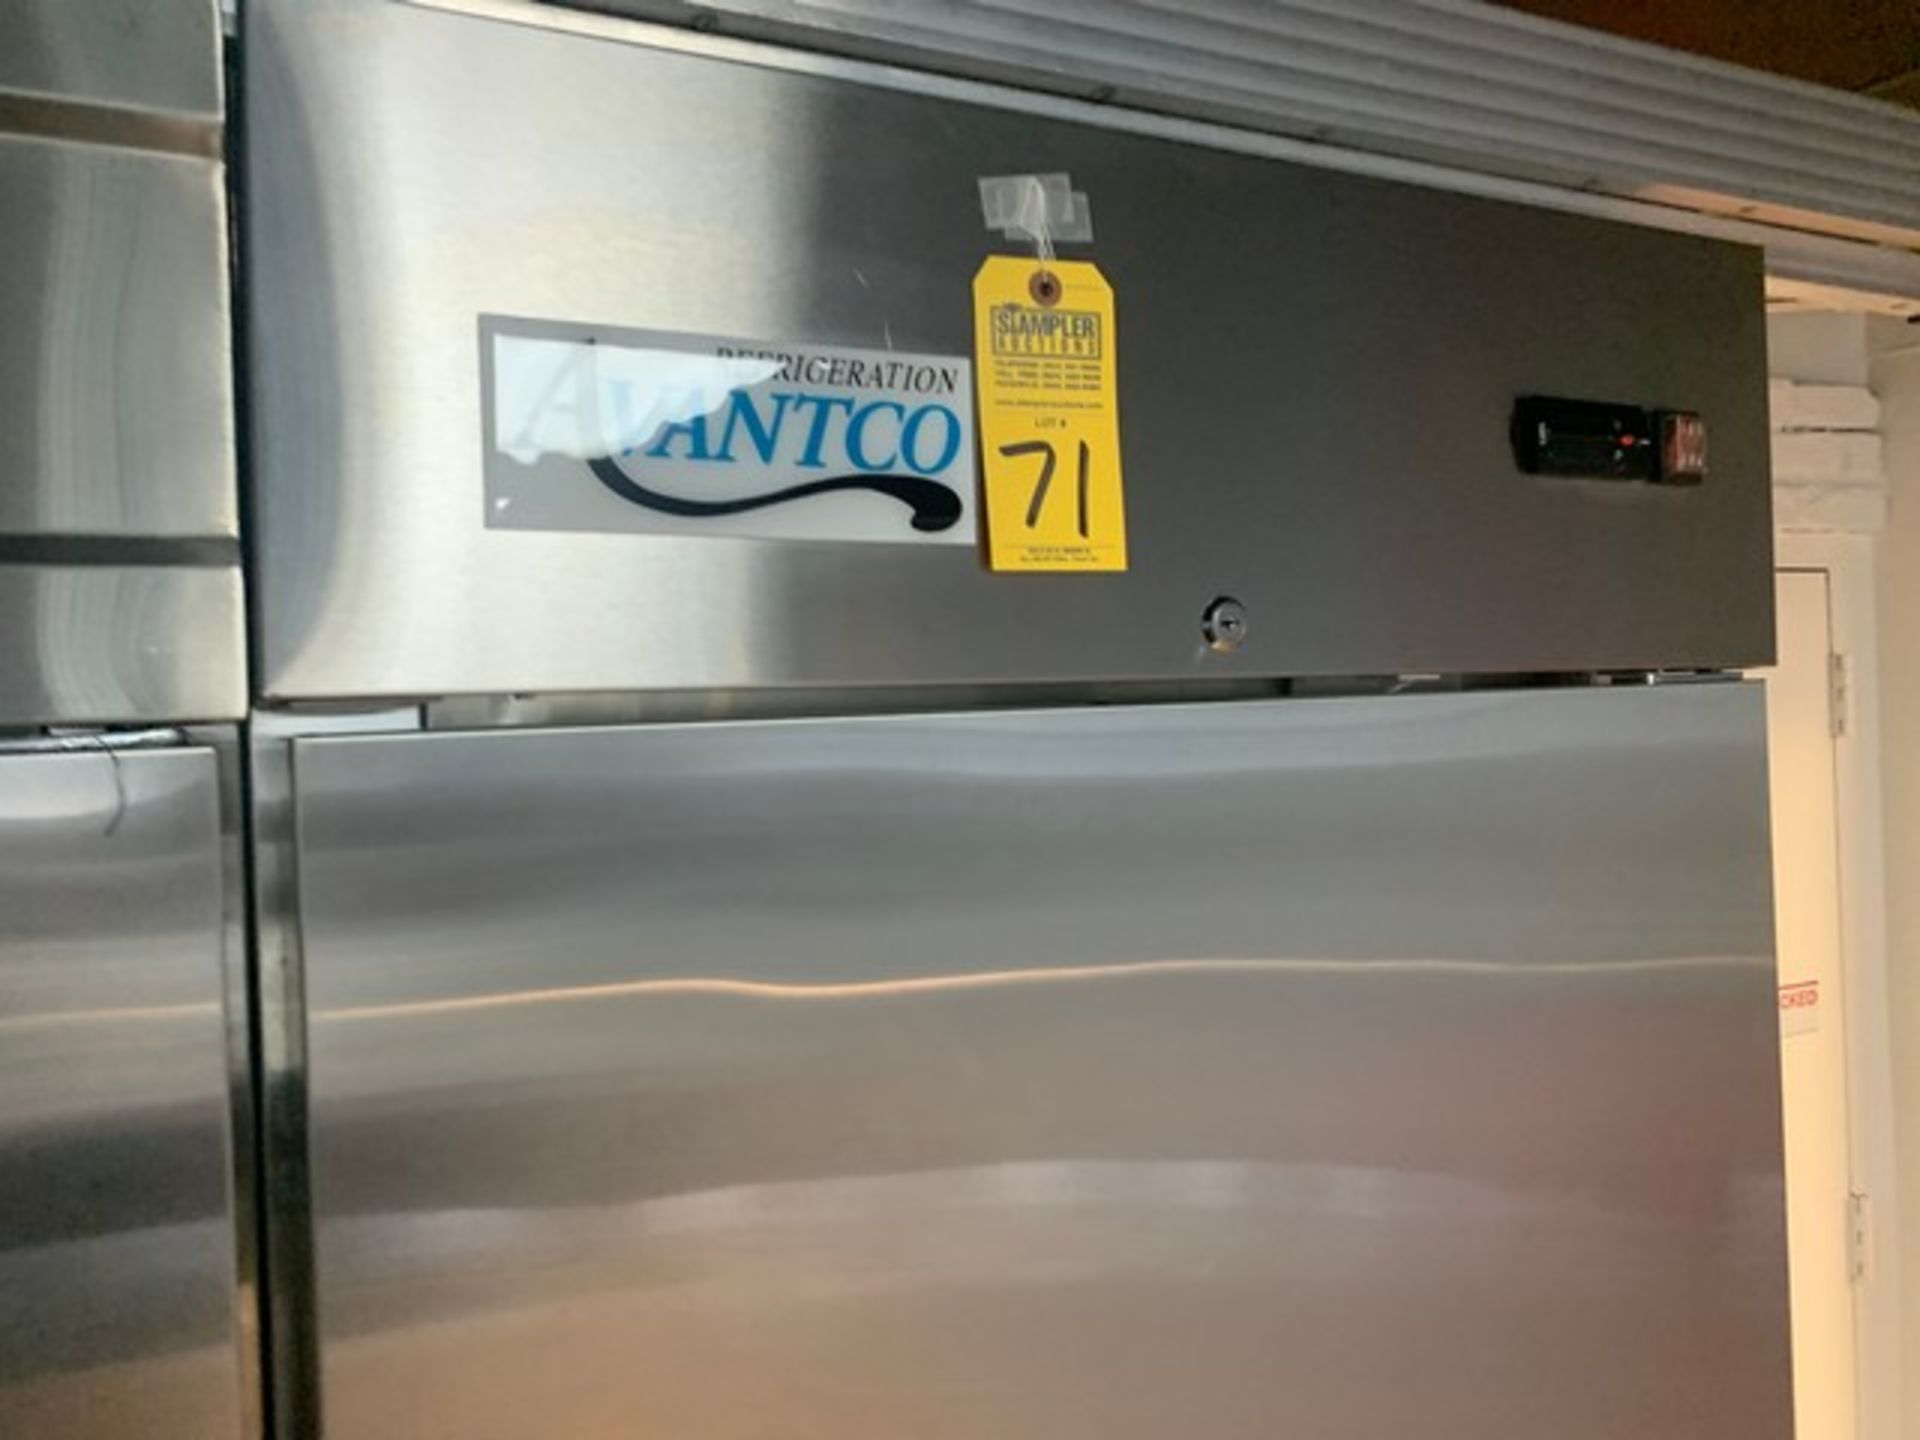 AVANTCO 178A2BRHC SELF-CONTAINED SINGLE DOOR COOLER - Image 2 of 4